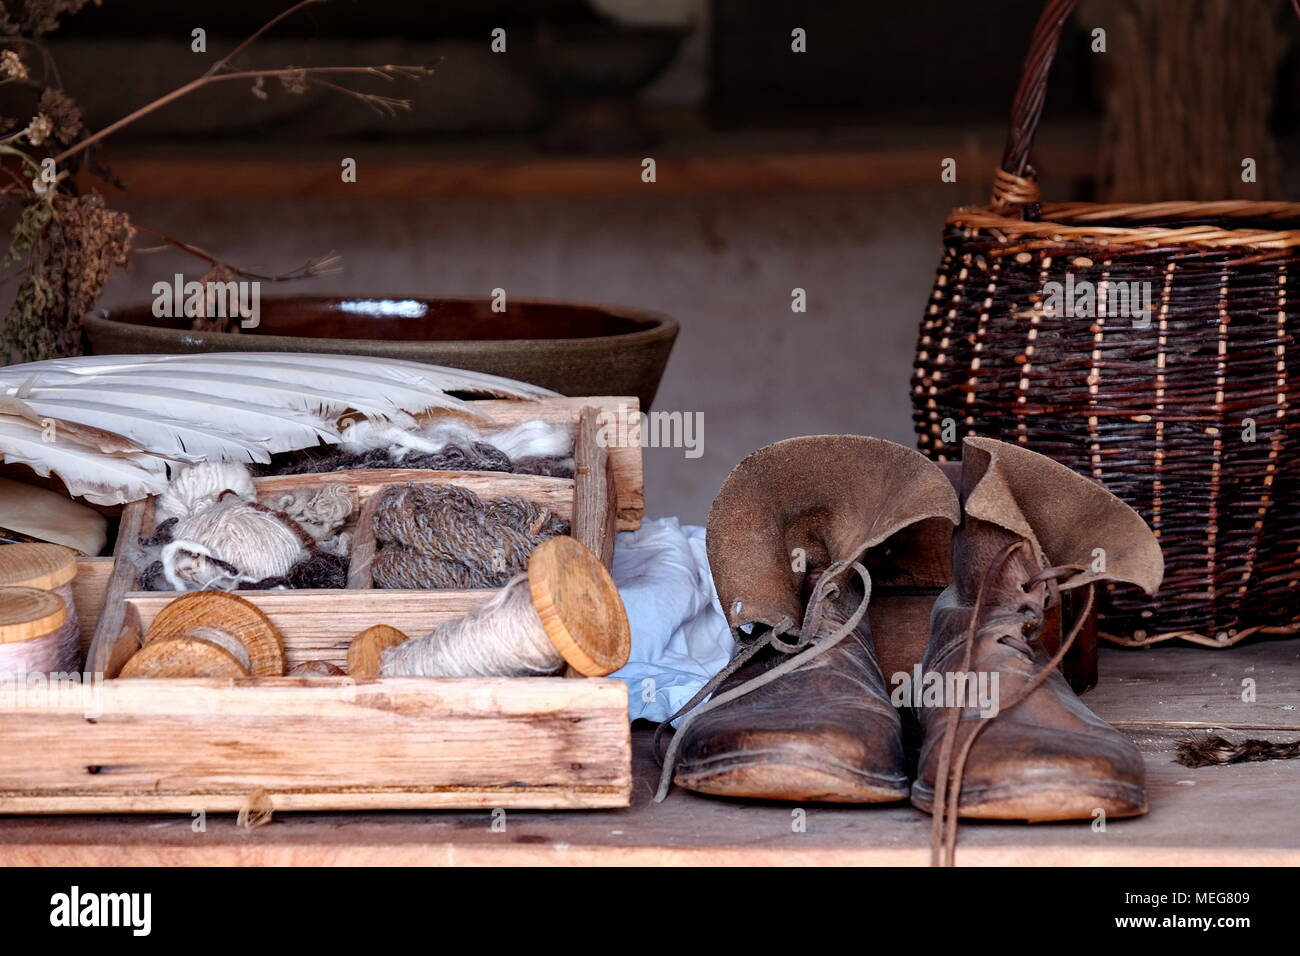 An assortment of shoes, bobbins, baskets and boxes at the Weald and Downland museum, Chichester. Stock Photo